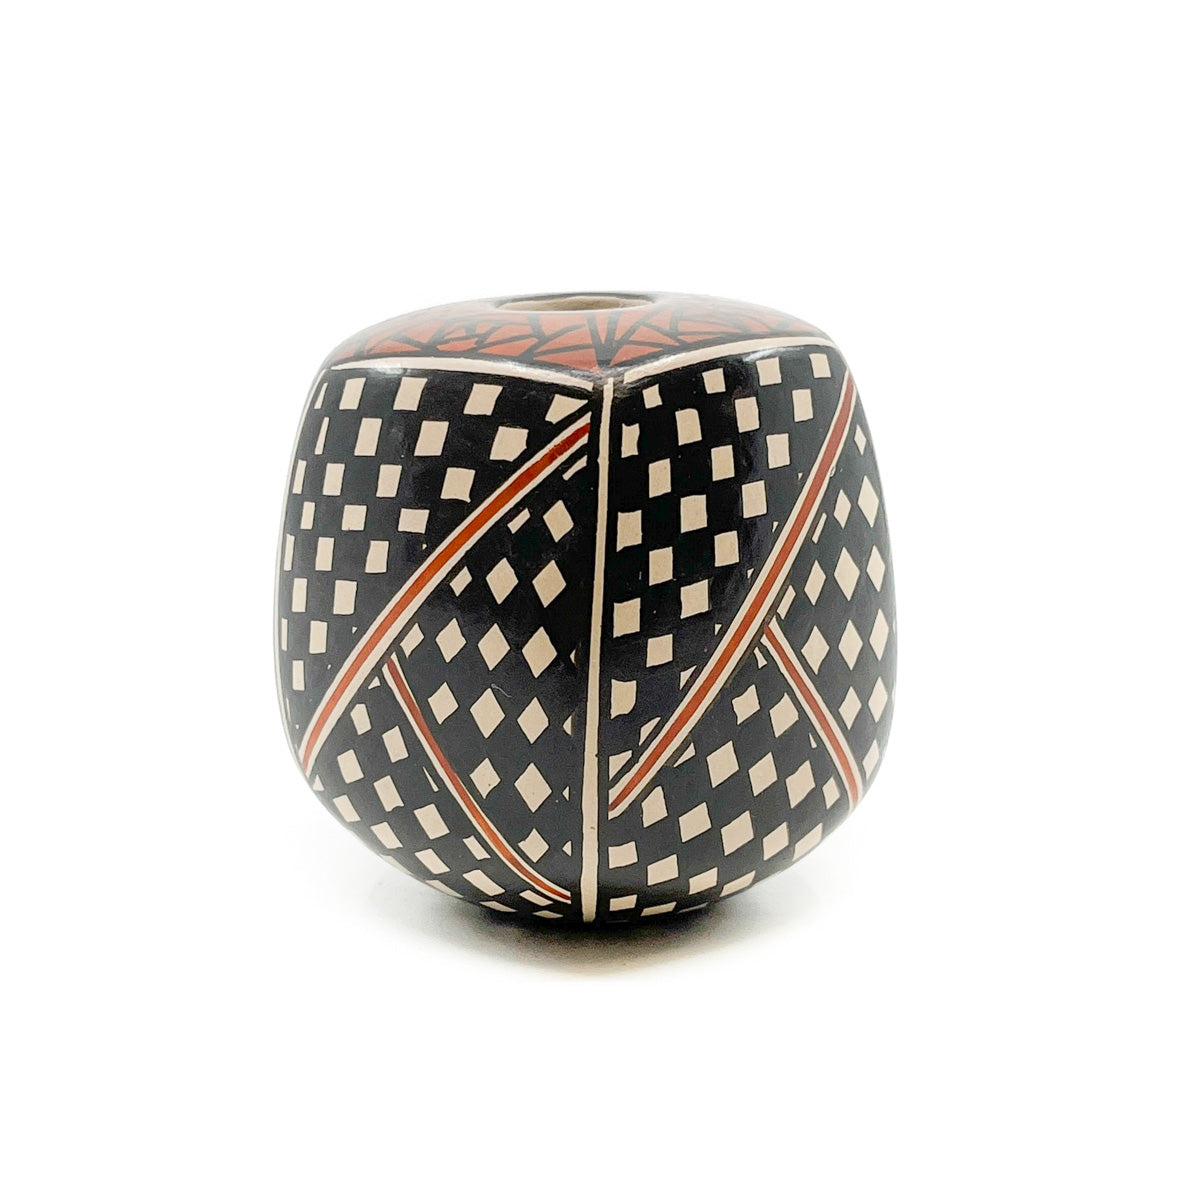 Five Sided Pot with Geometric Designs